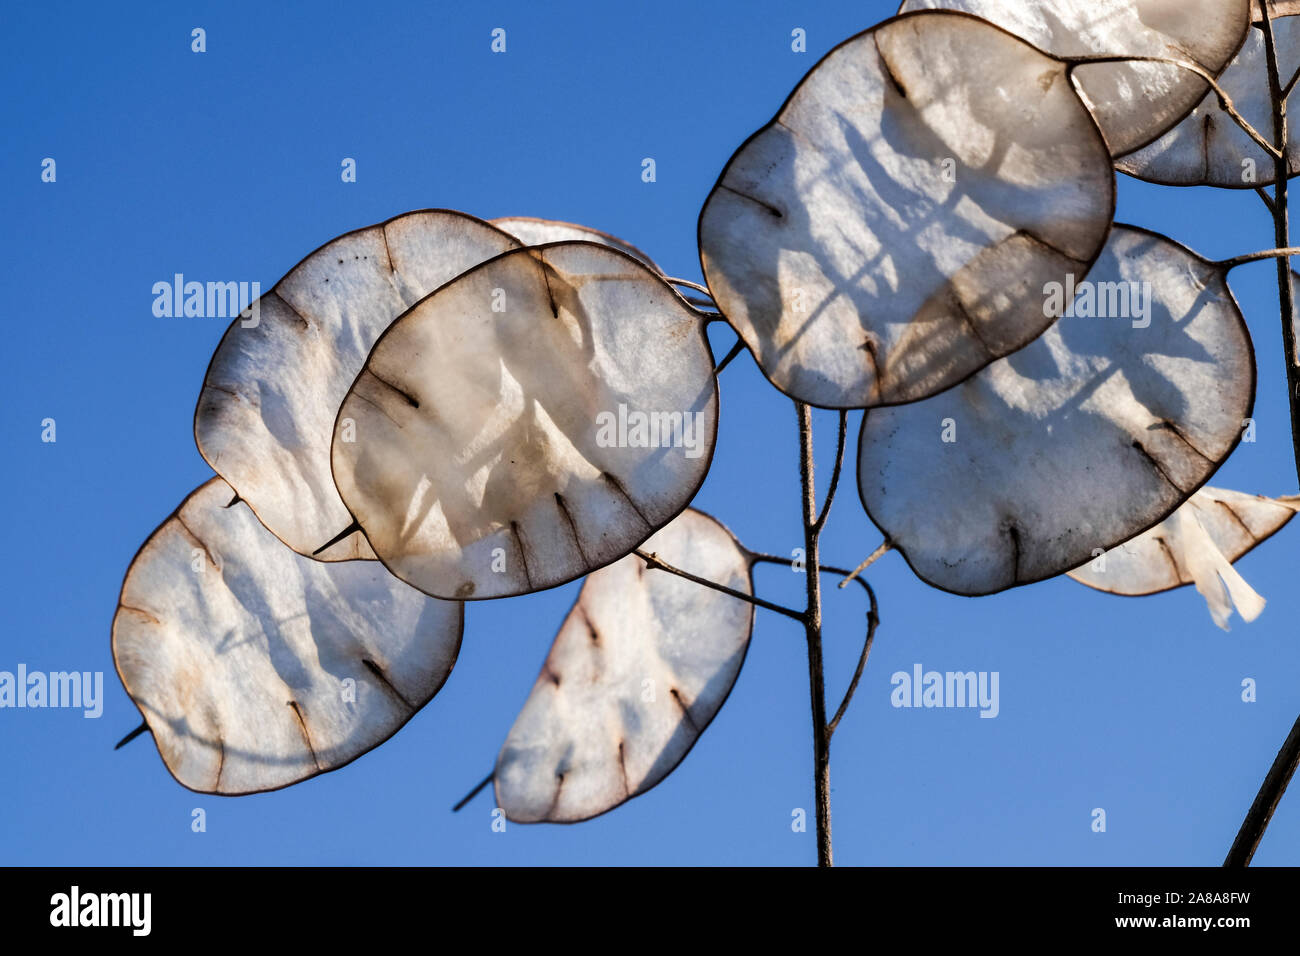 Silvery discs of 'honesty' seed pods, lunaria annua, against a blue summer sky Stock Photo